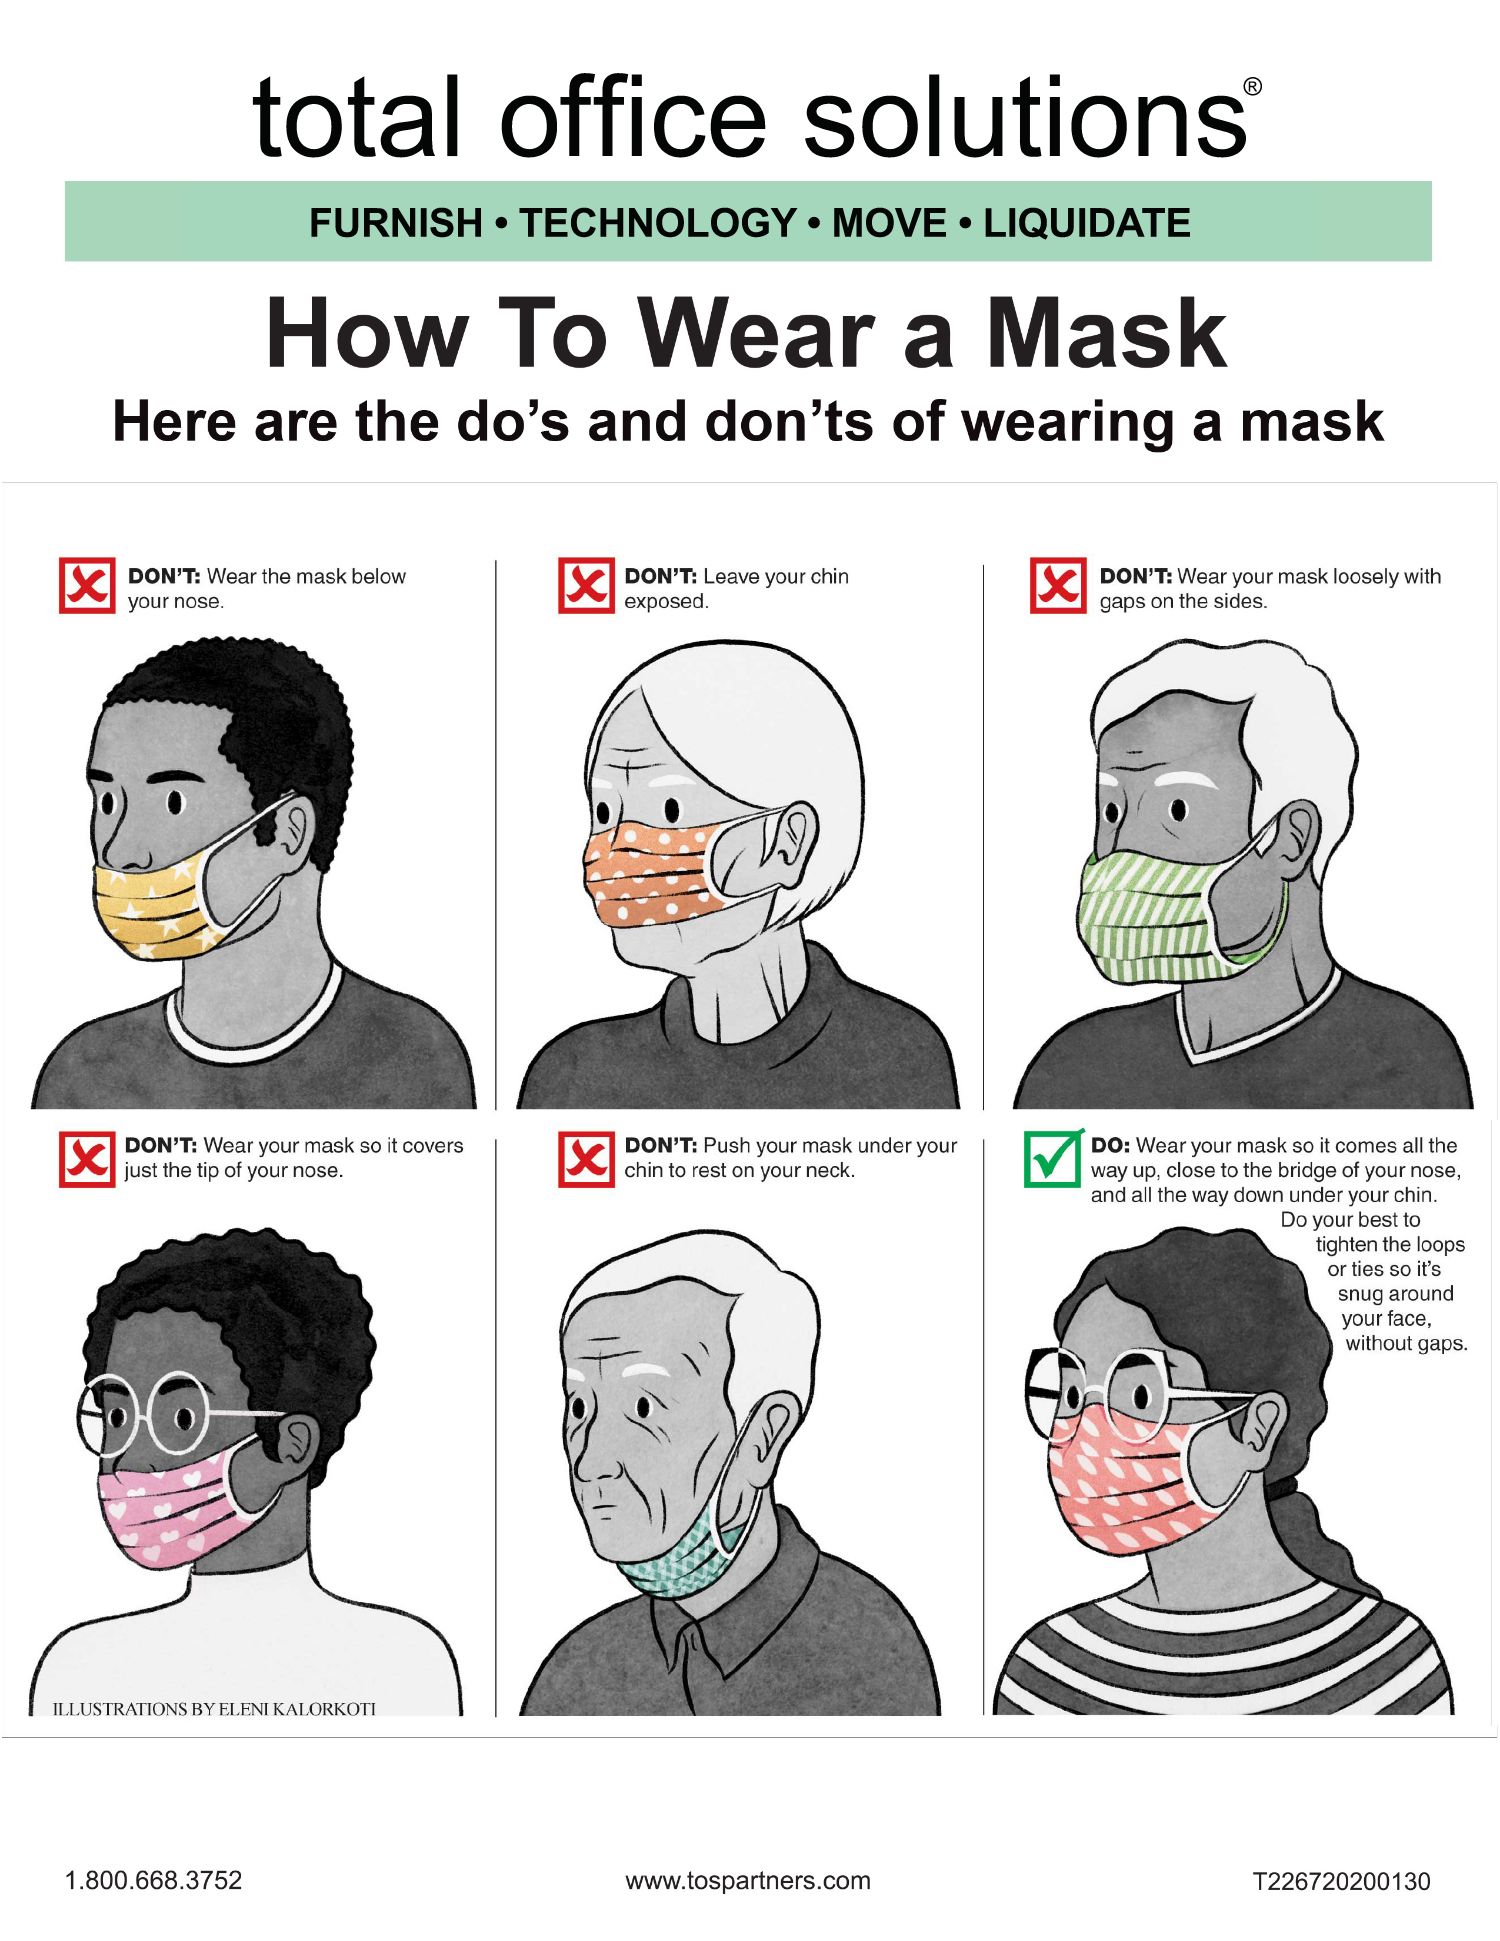 How-To-Wear-a-Mask